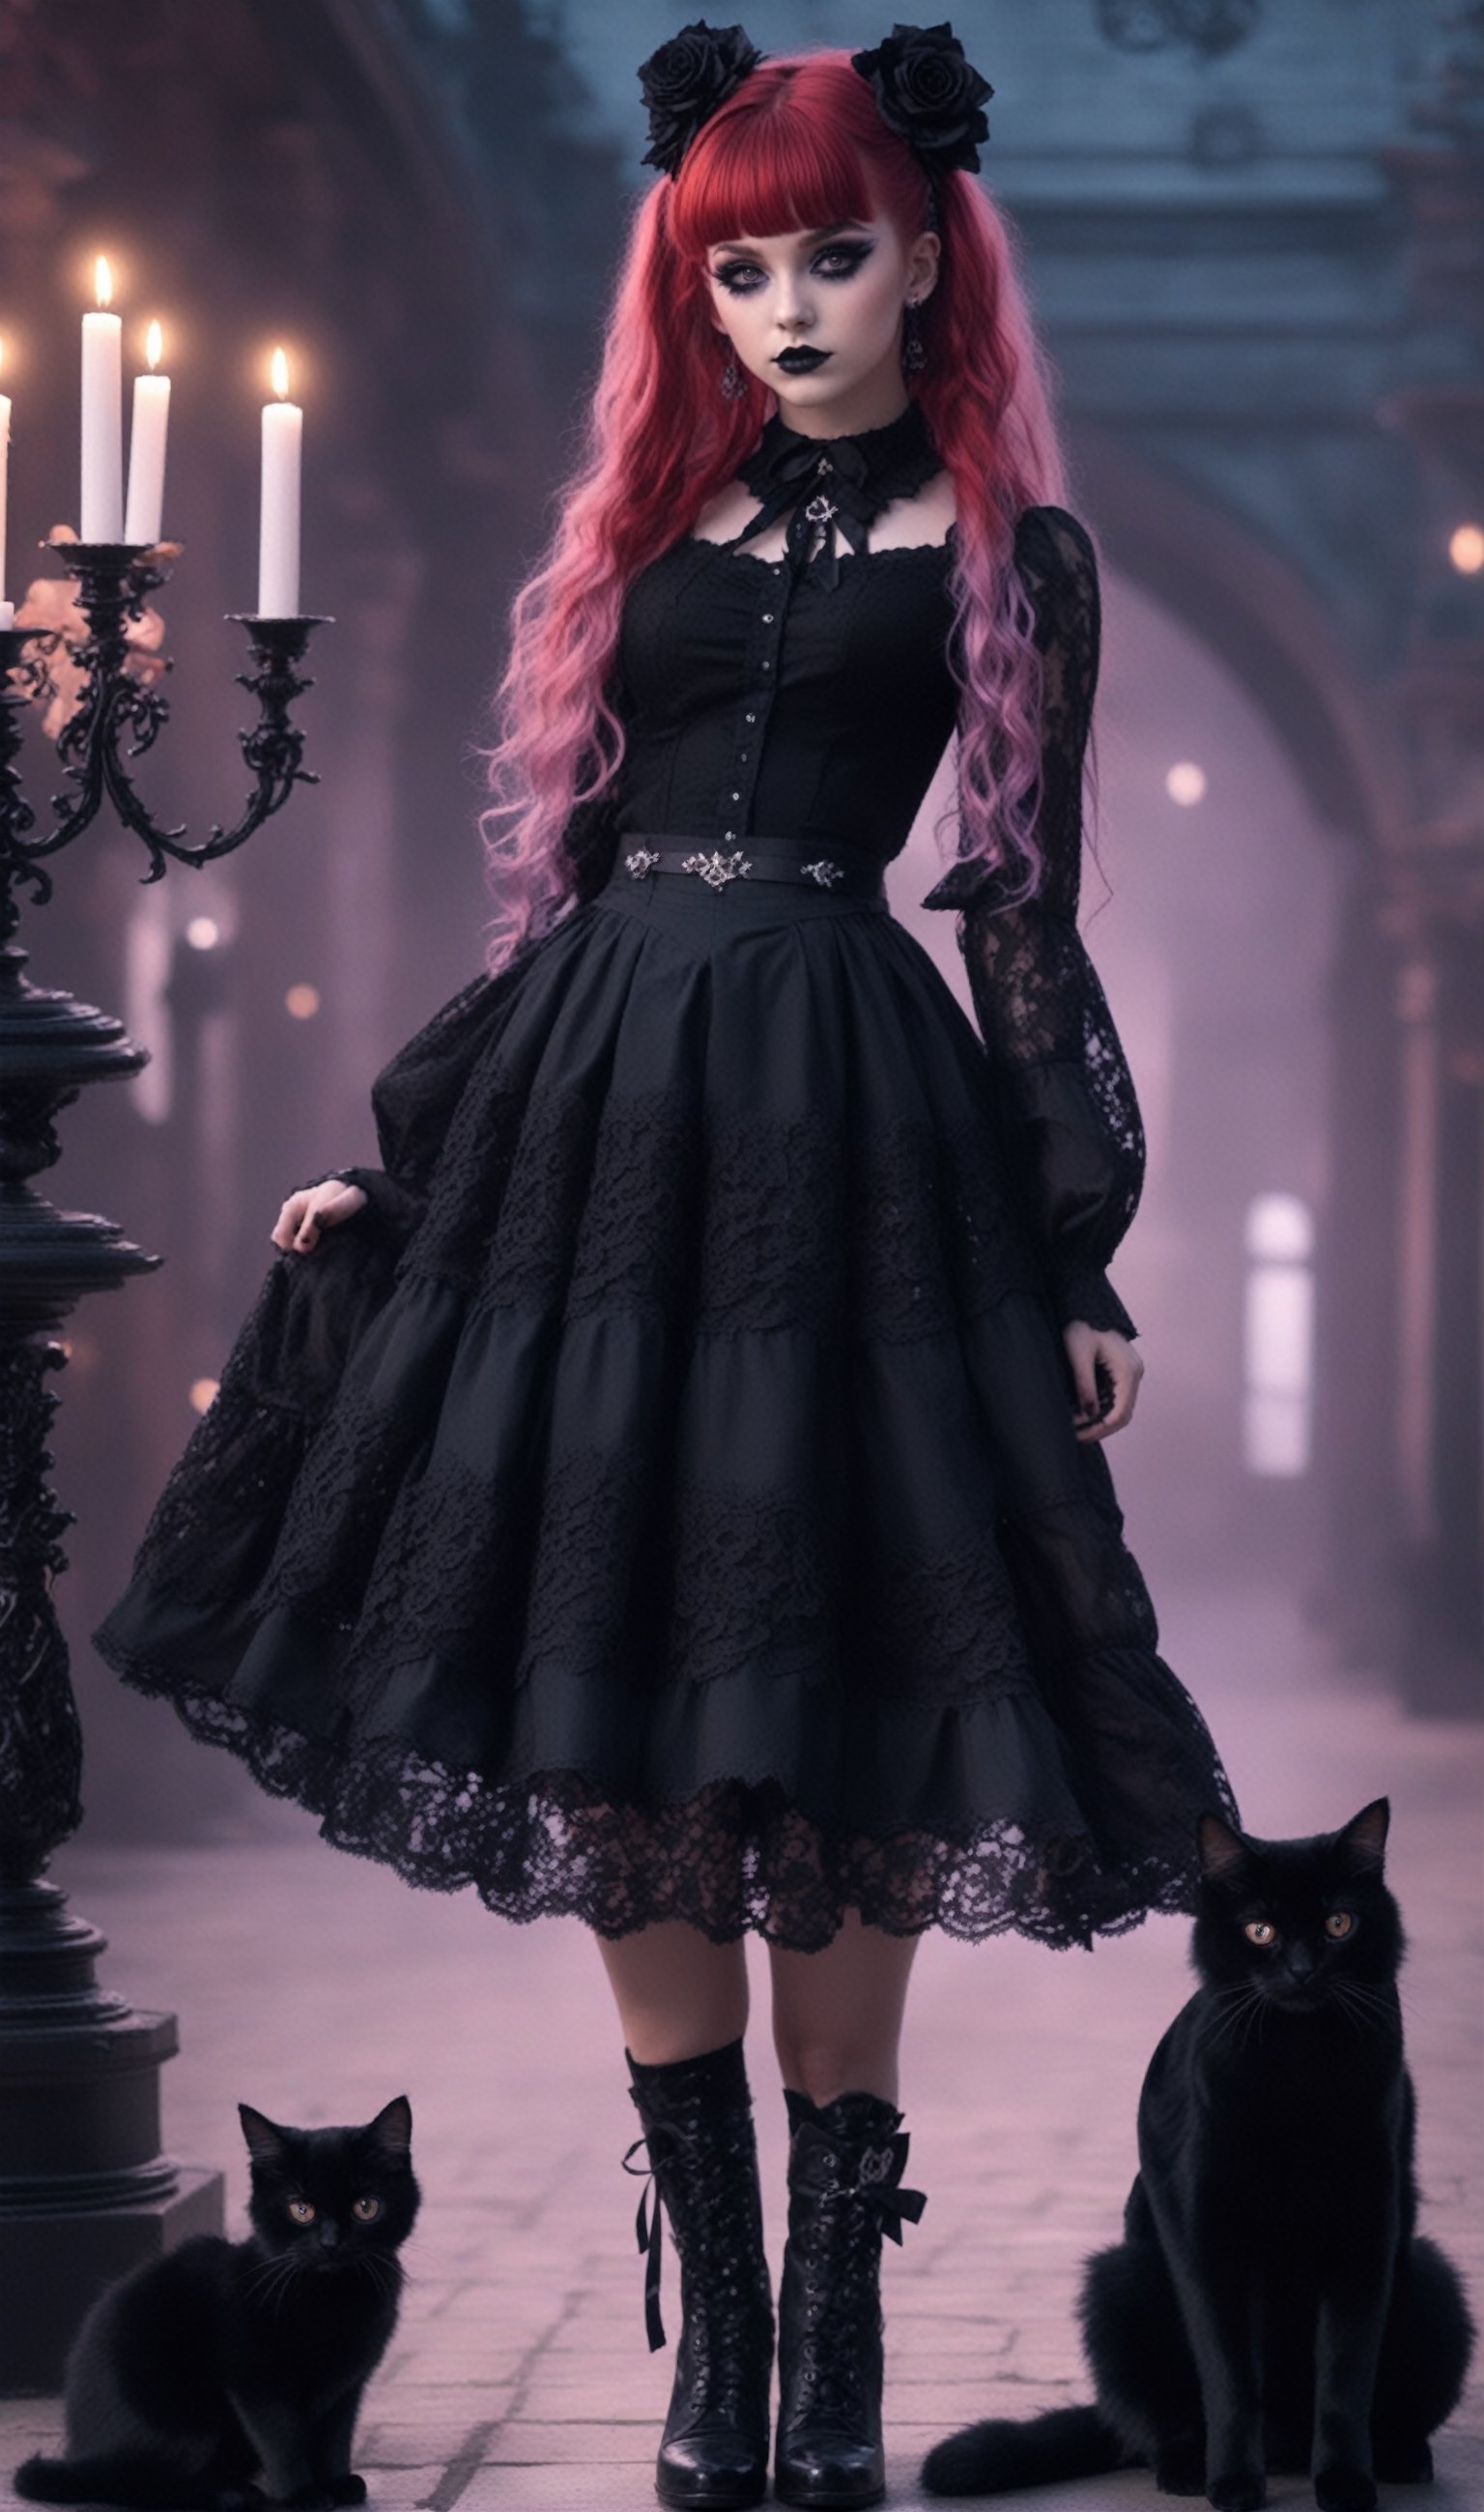 photorealistic concept art, 1girl, irish Young girl, red long hair, messy hair, elaborate hair, hair buns, mischevious smile look on face, dark eye make up, elaborate outfit, black roses in hair, pastel gothic Fashion Girl,Grunge-Lolita Fashion, girly pastel lace blouse, high heel embroidered intricate boots,The ethereal glow, metallic accessories, and moody atmosphere create a mystical aura,
Gothic Lolita long lace Skirt, her look exudes dark glamour,natural volumetric cinematic perfect light,pastelbg,pastel goth, intricate background, candles, realistic cats walking around,